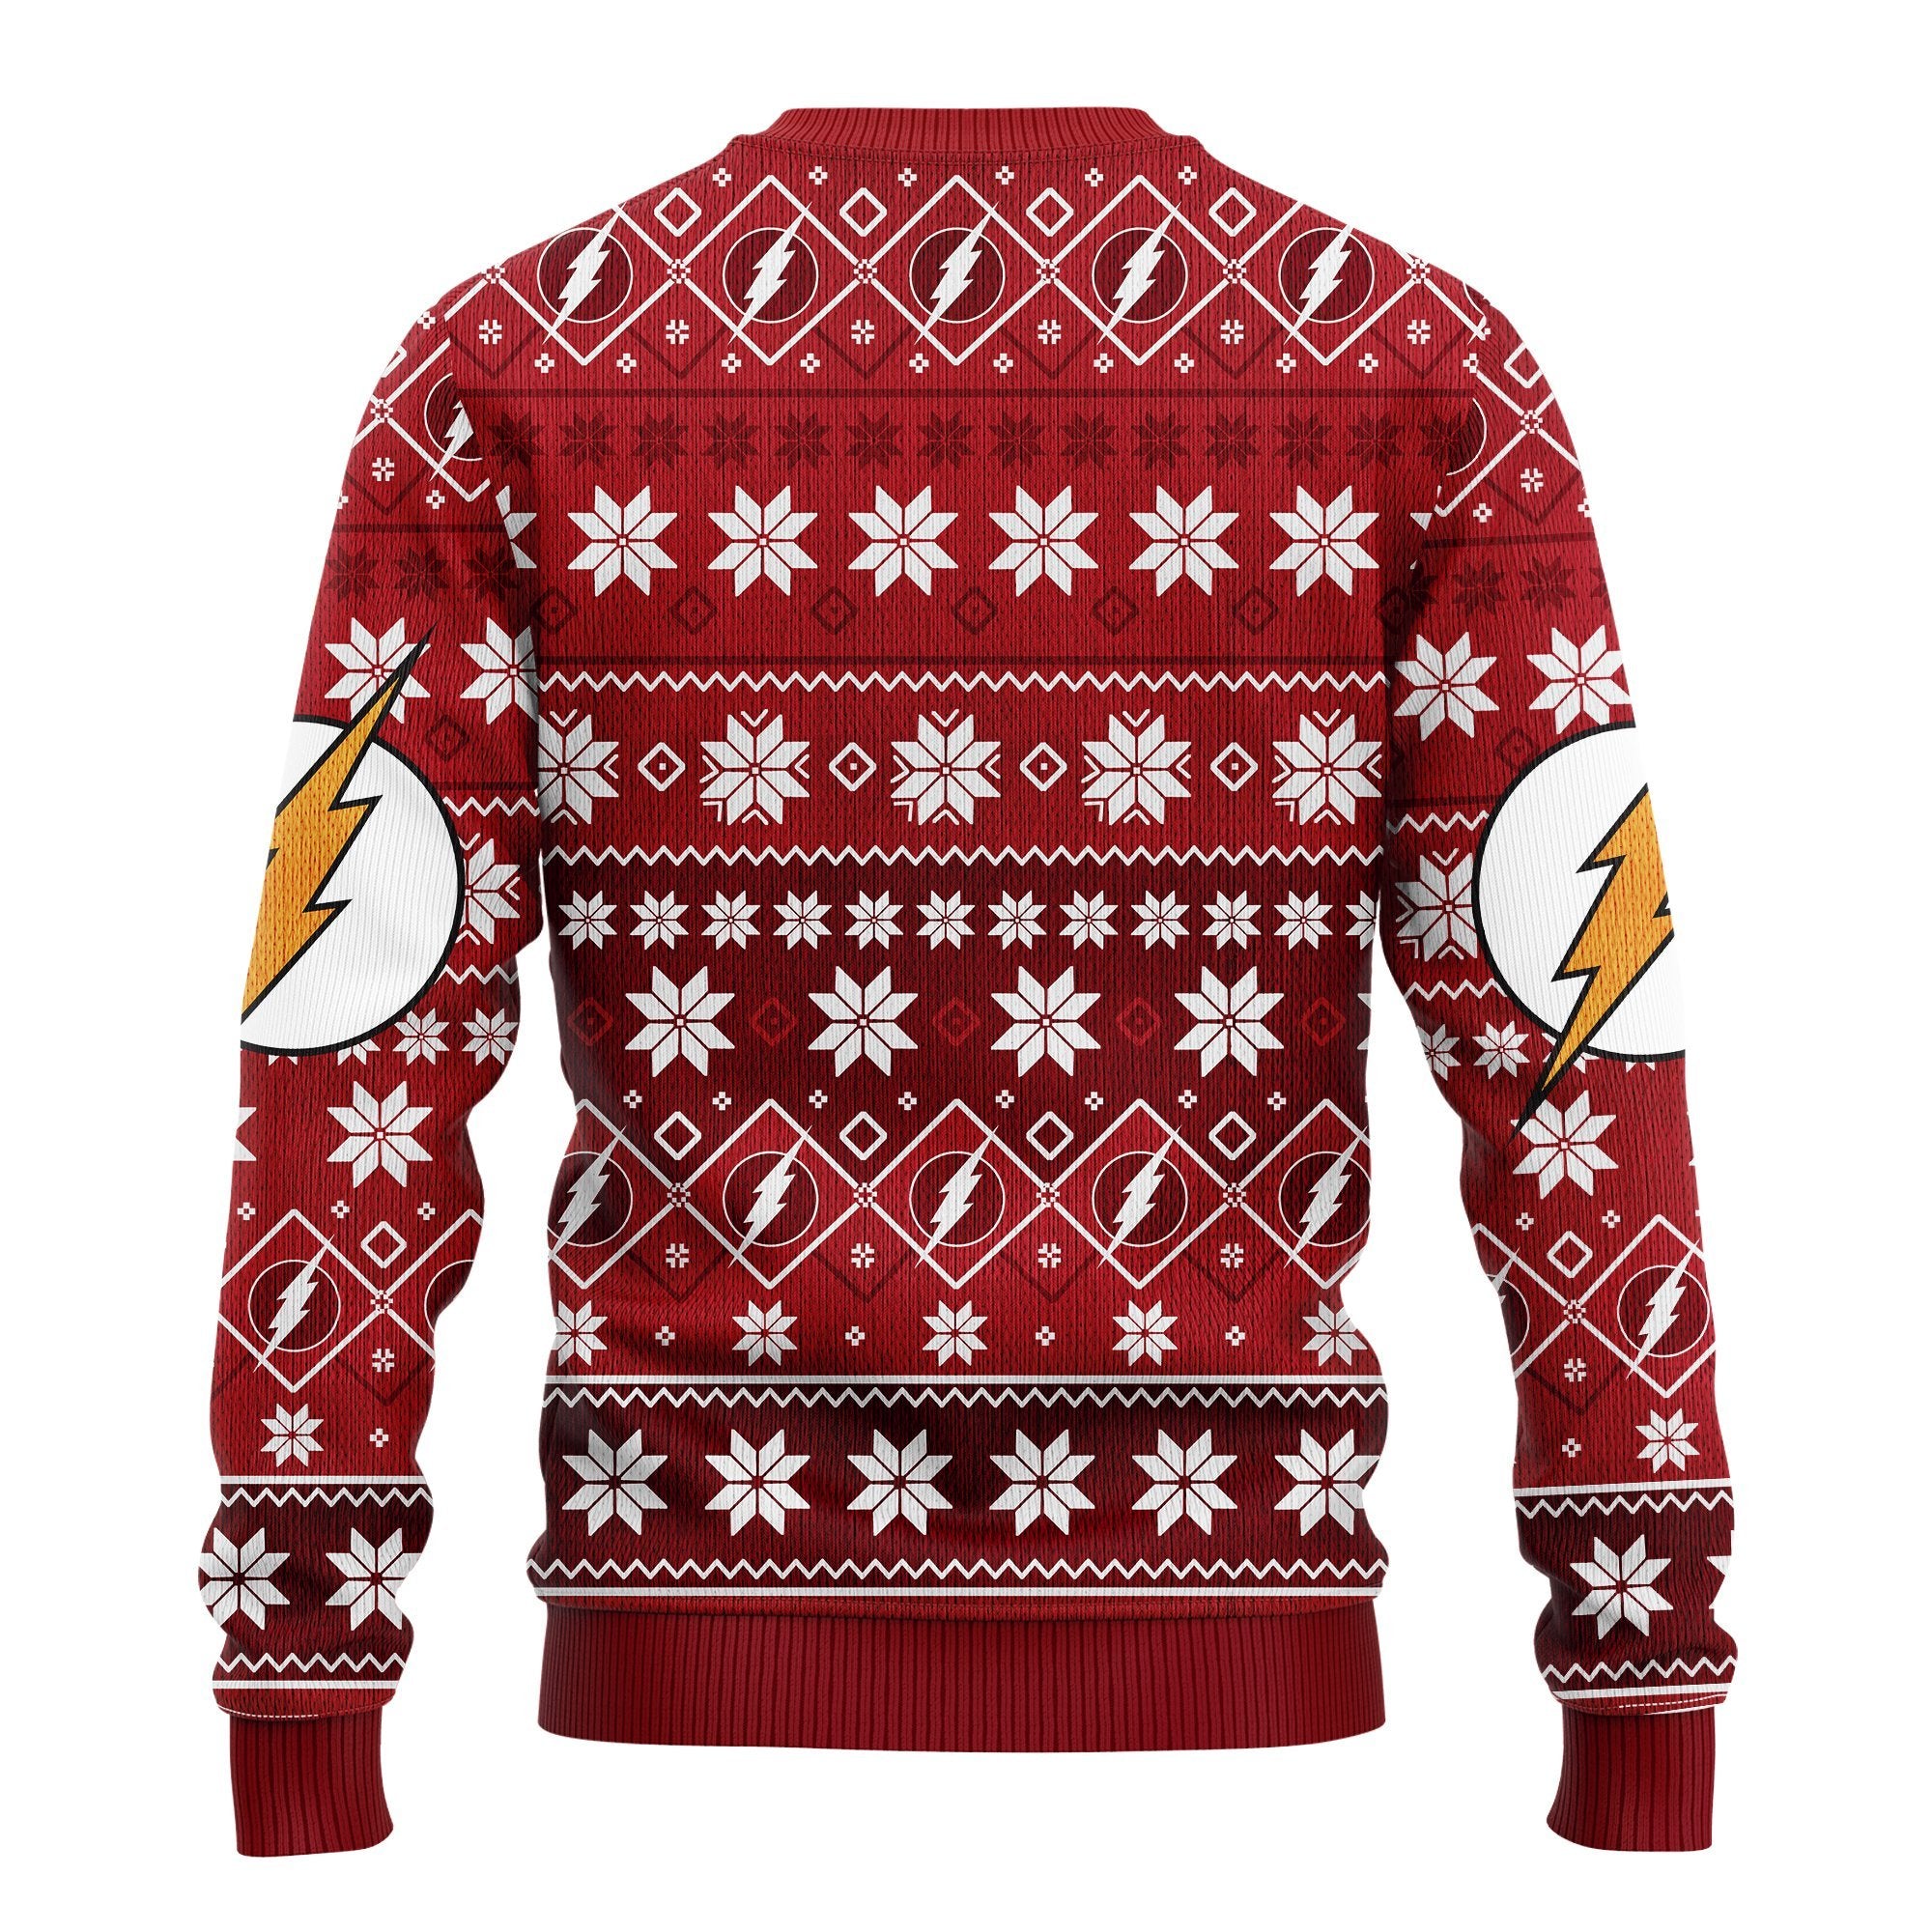 The Flash Ugly Christmas Sweater Amazing Gift Idea Thanksgiving Gift